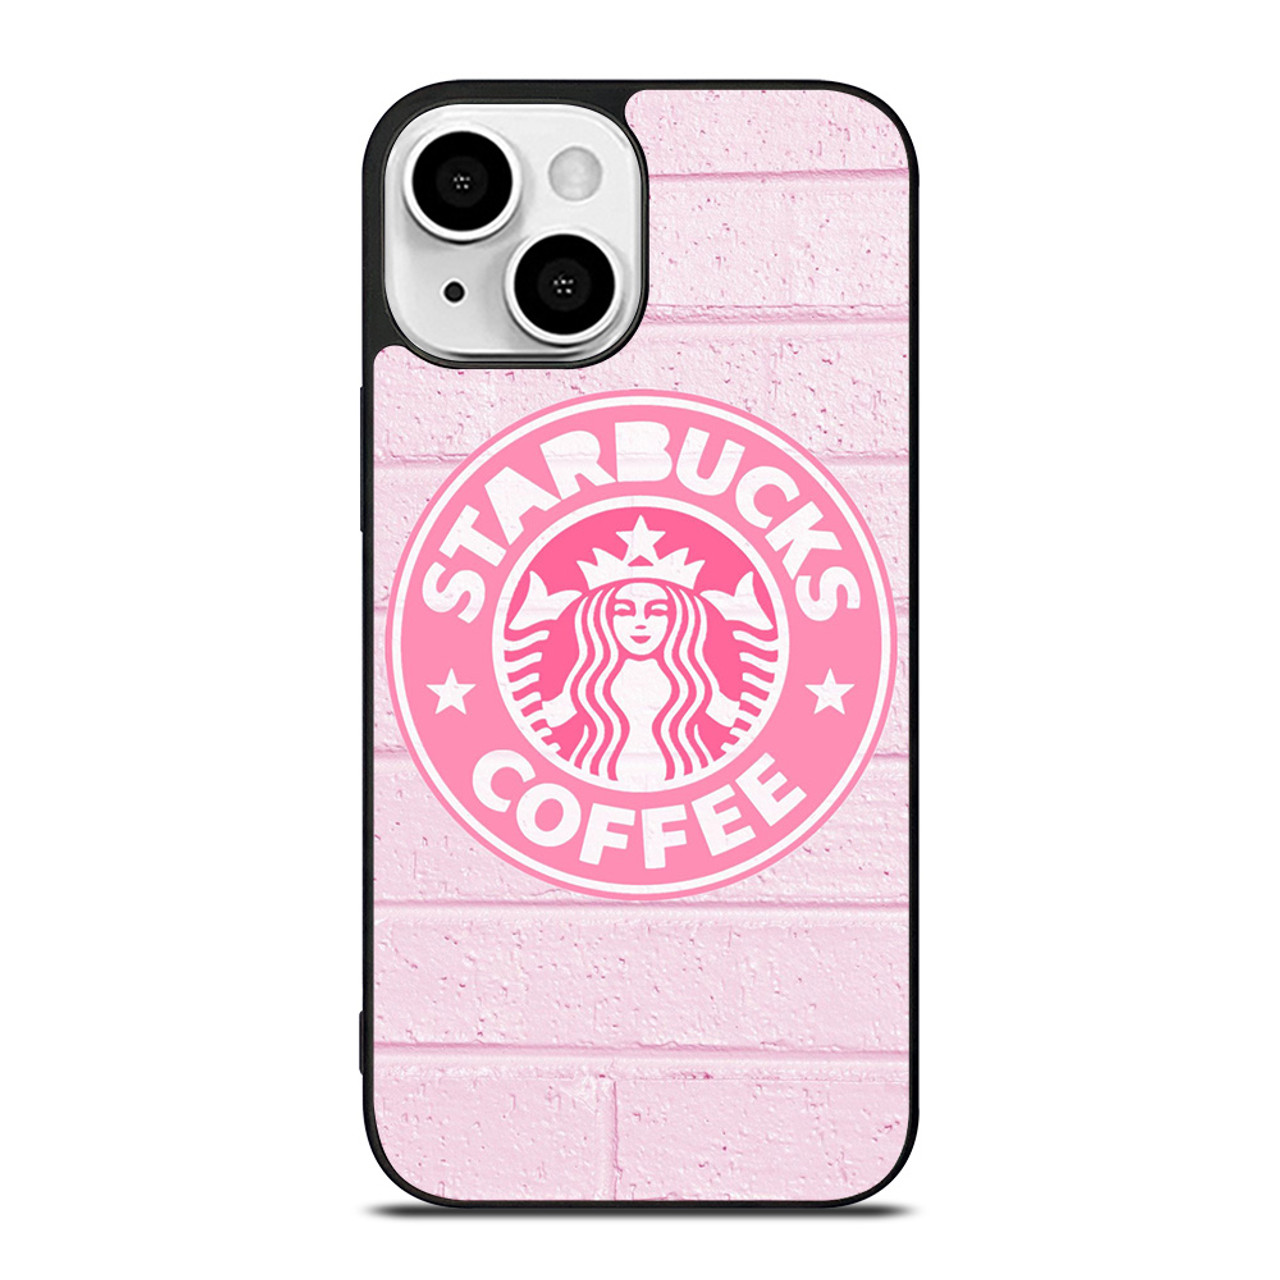 IPhone 13 Pro Case Starbuck Print Design, Mobile Phone Case for IPhone, Latest IPhone Covers